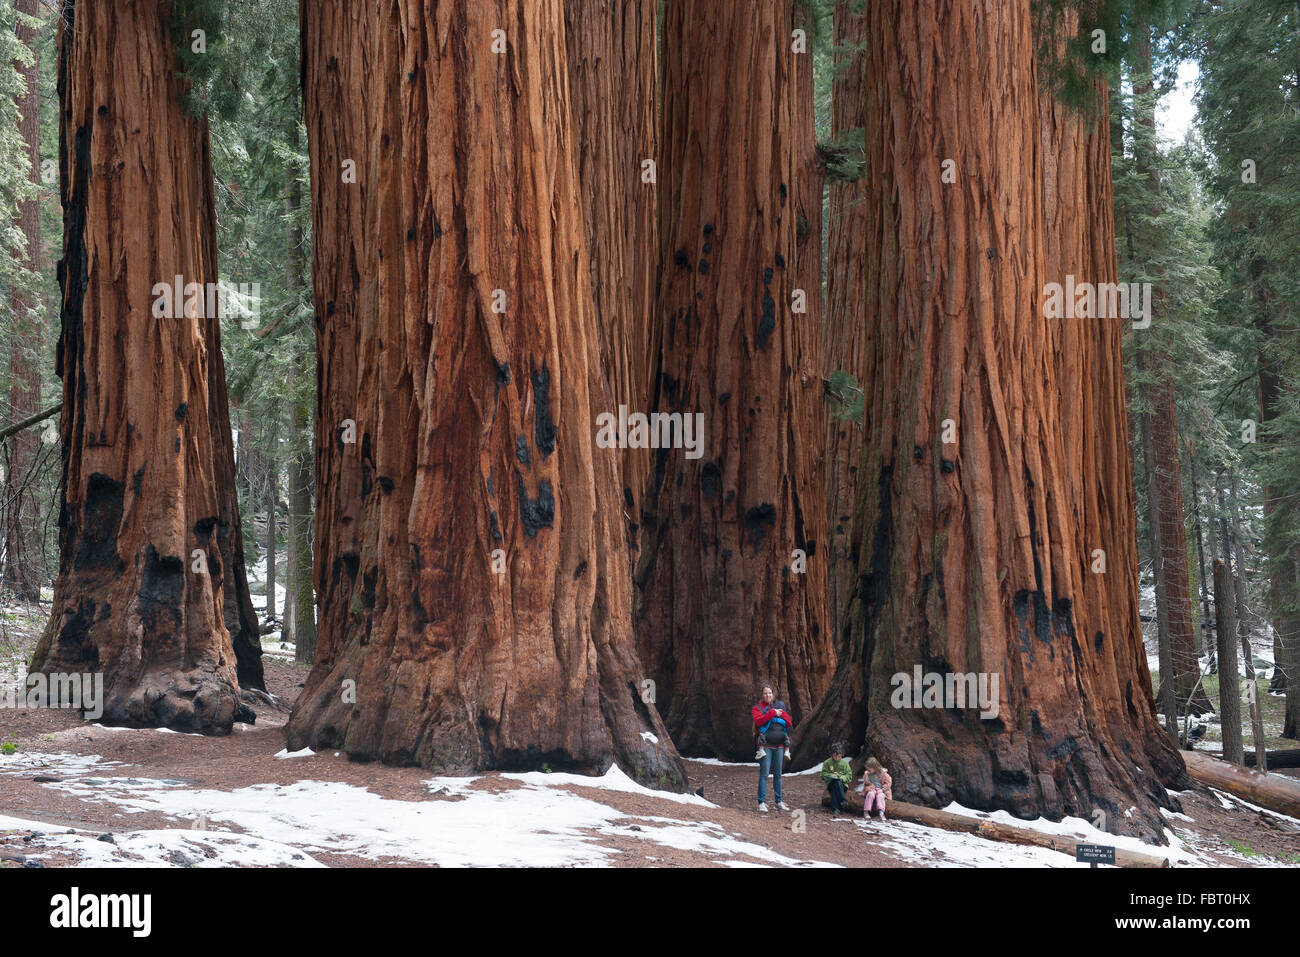 Family standing in front of giant sequoias, Sequoia and Kings Canyon National Parks, California, USA Stock Photo